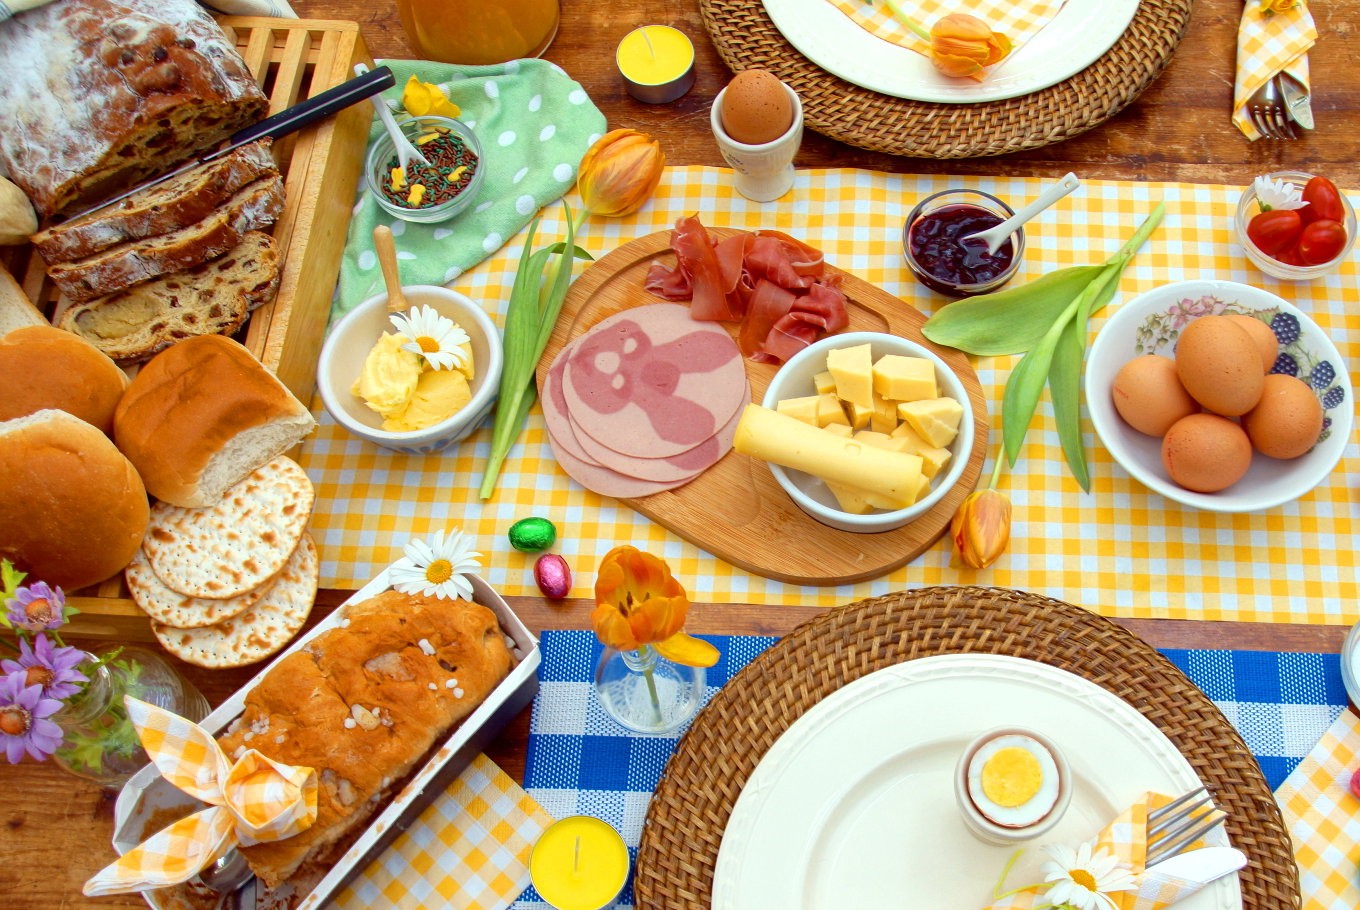 The hotel breakfast buffet dilemma: Here are the rules to follow ...